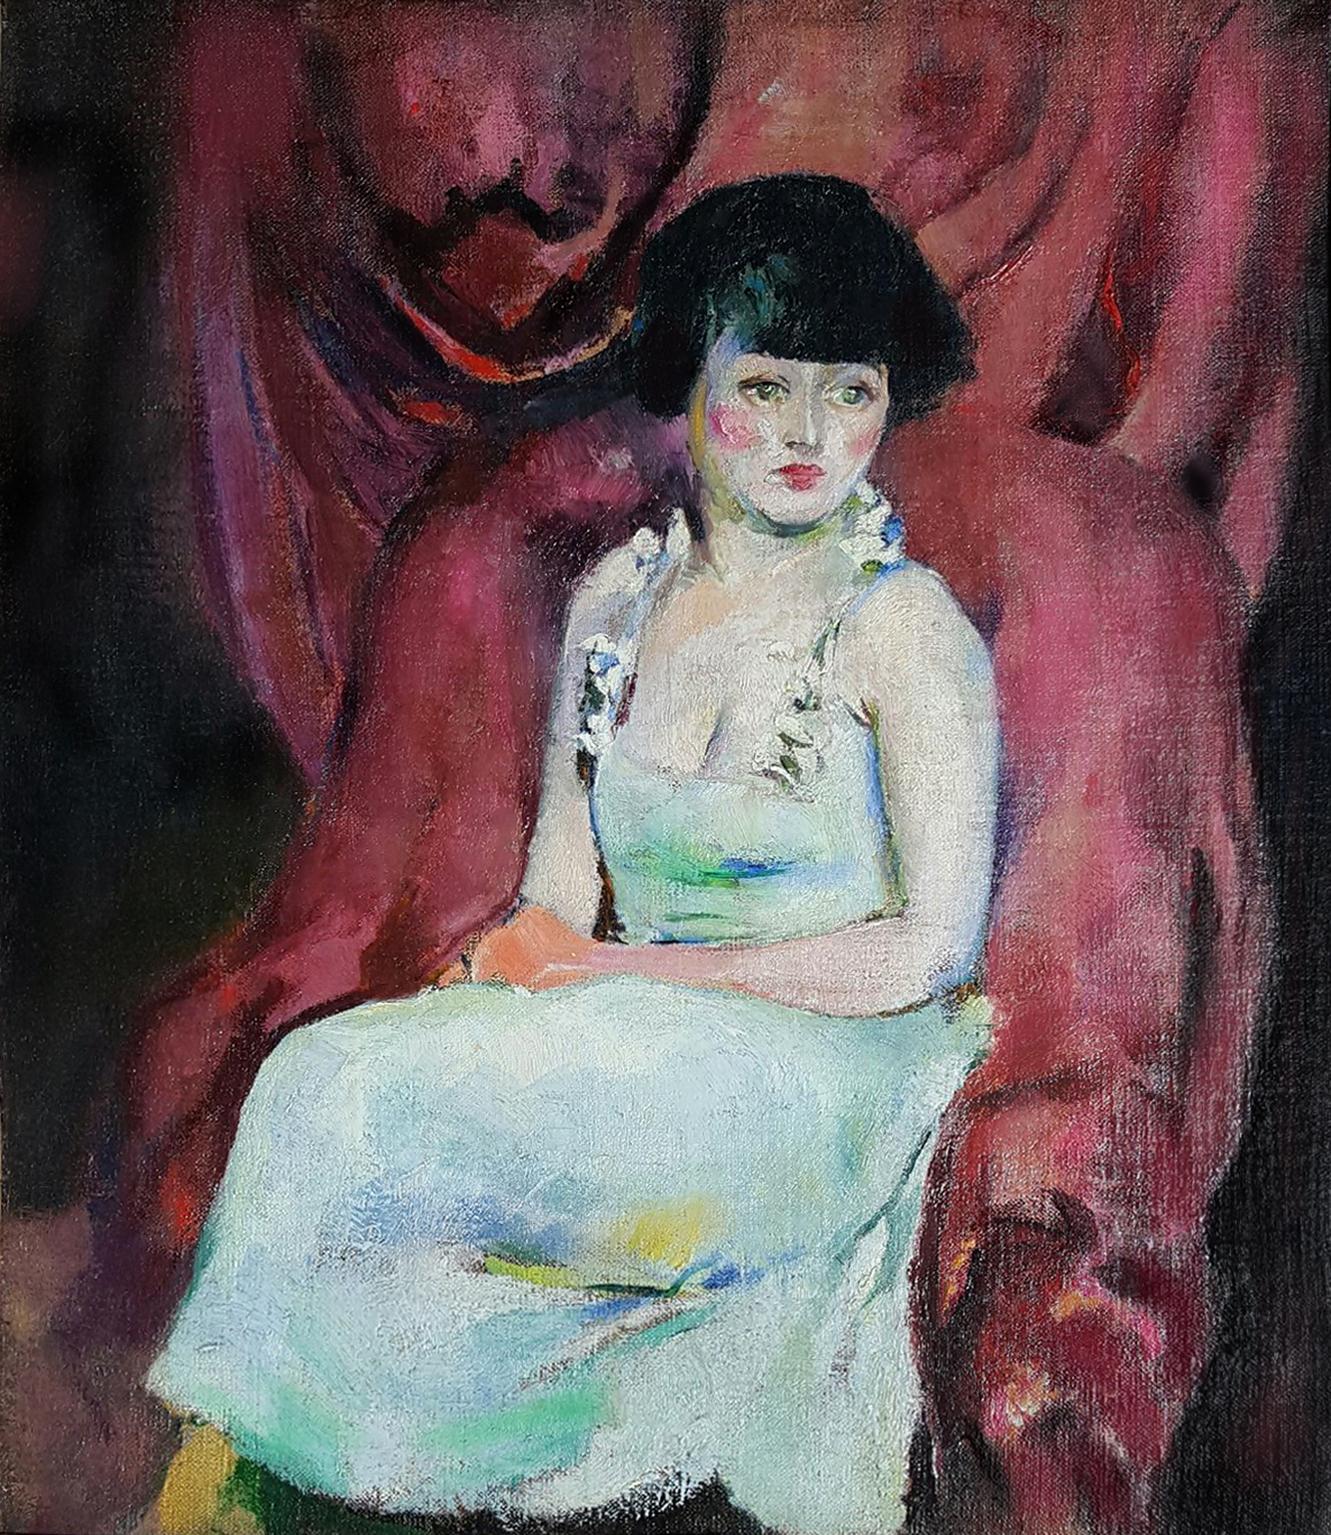 Portrait of a Charming Seated Woman Against Maroon Drapes